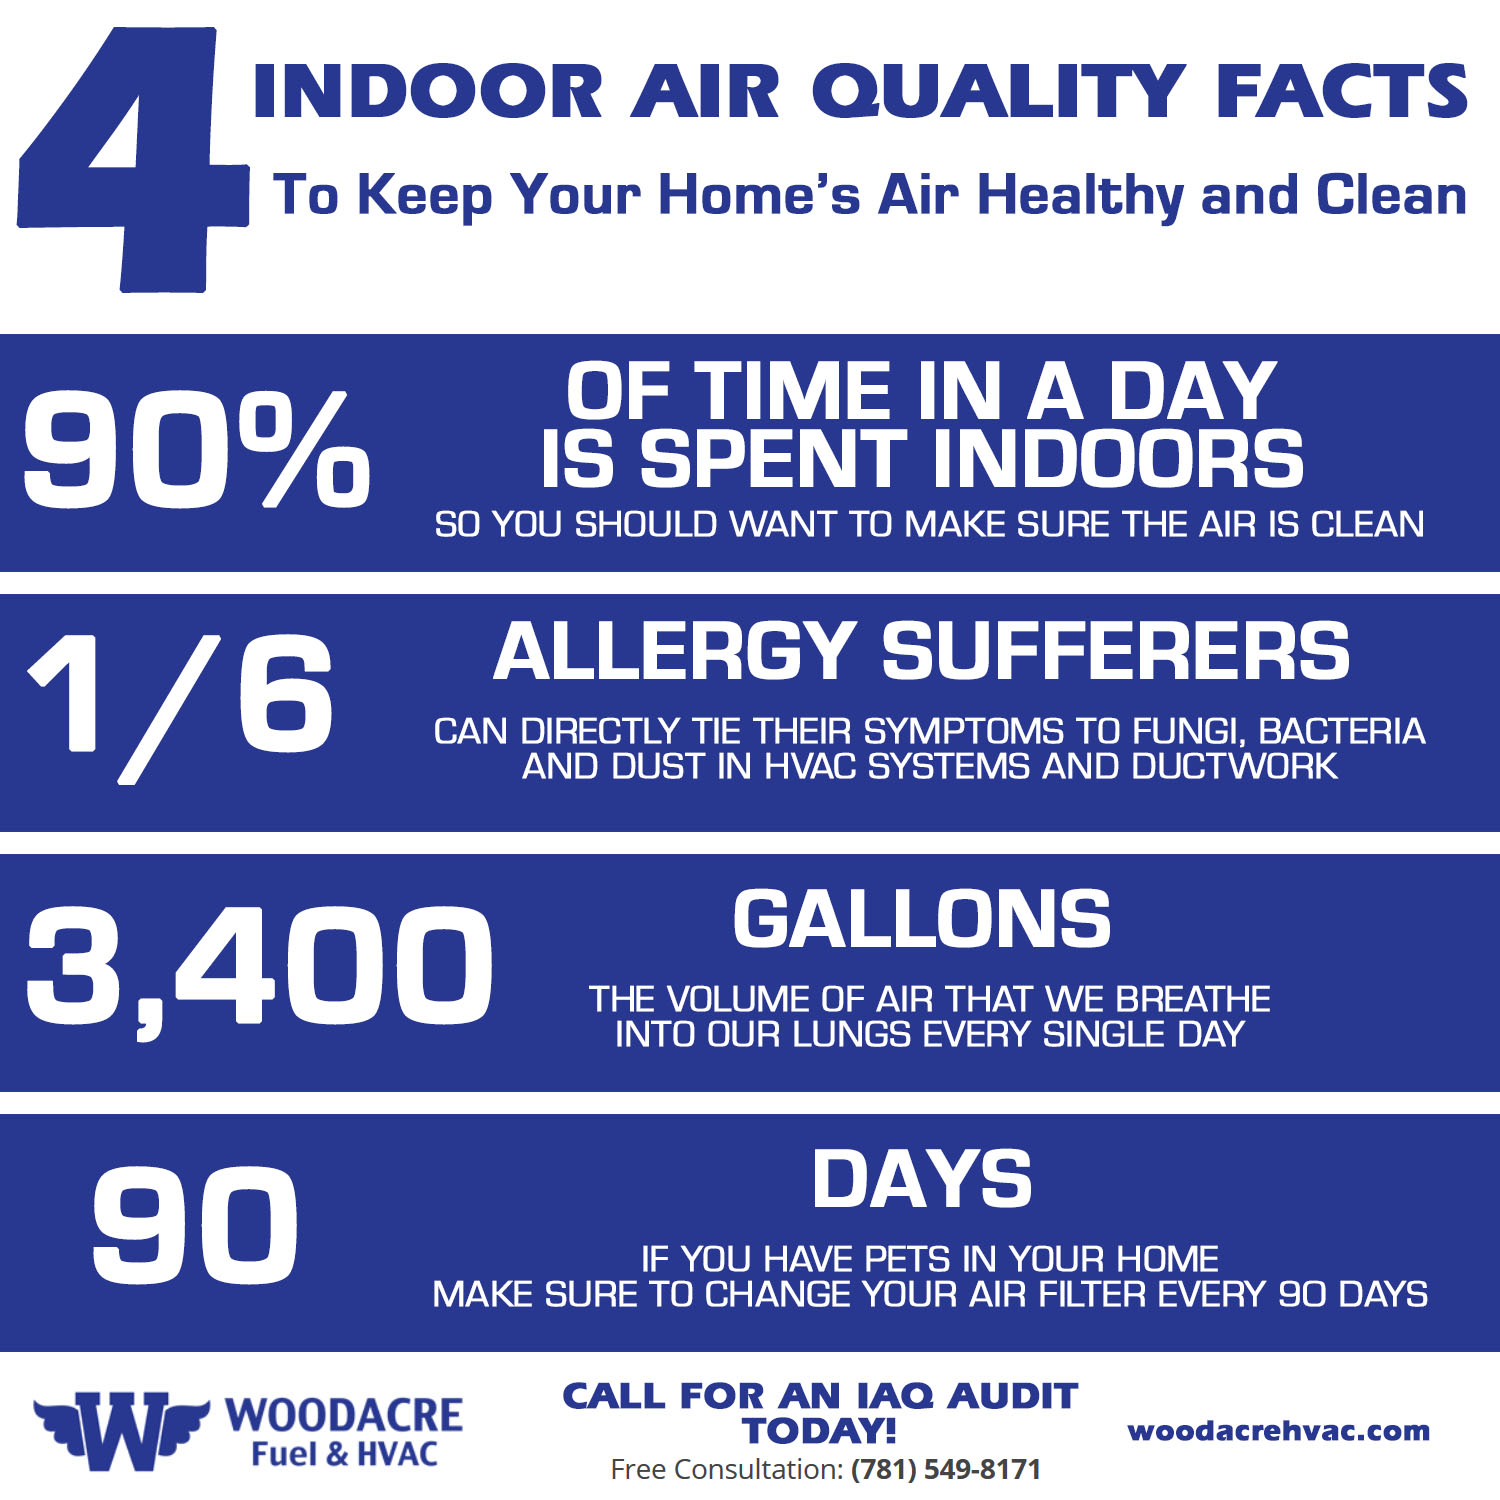 Home Air Healthy and Clean